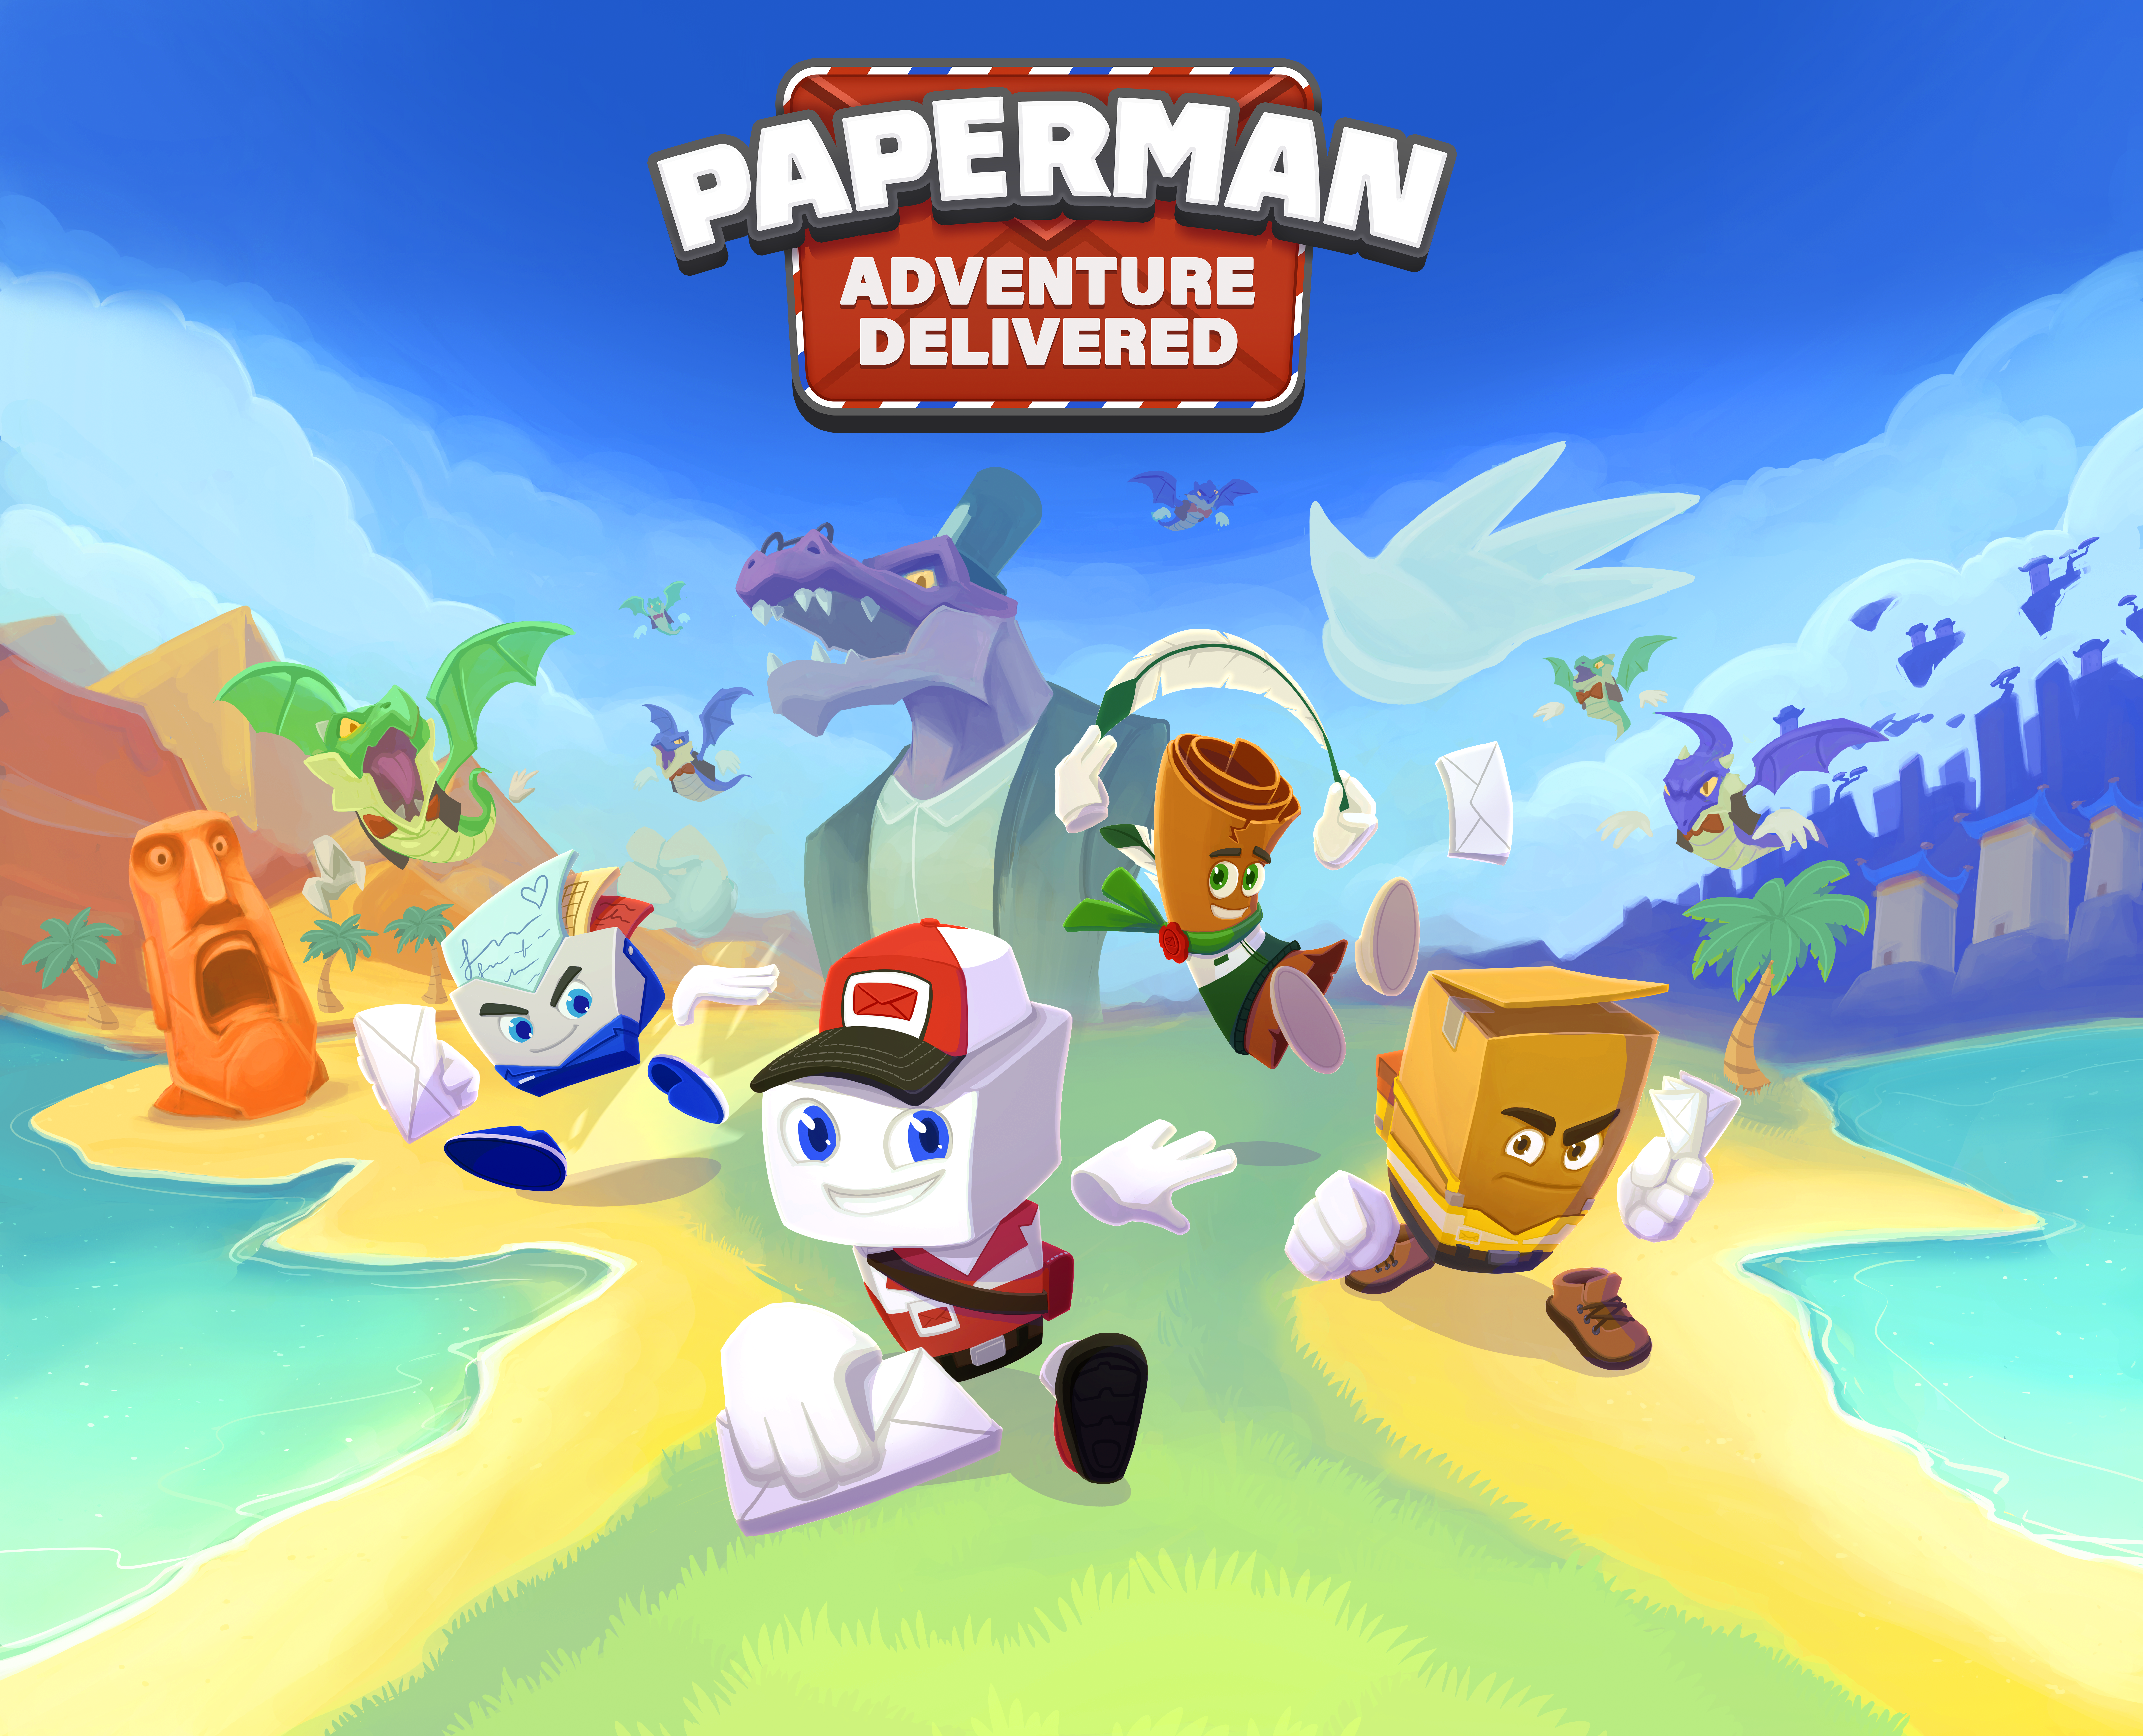 Paperman Adventure Delivered Key Art with logo